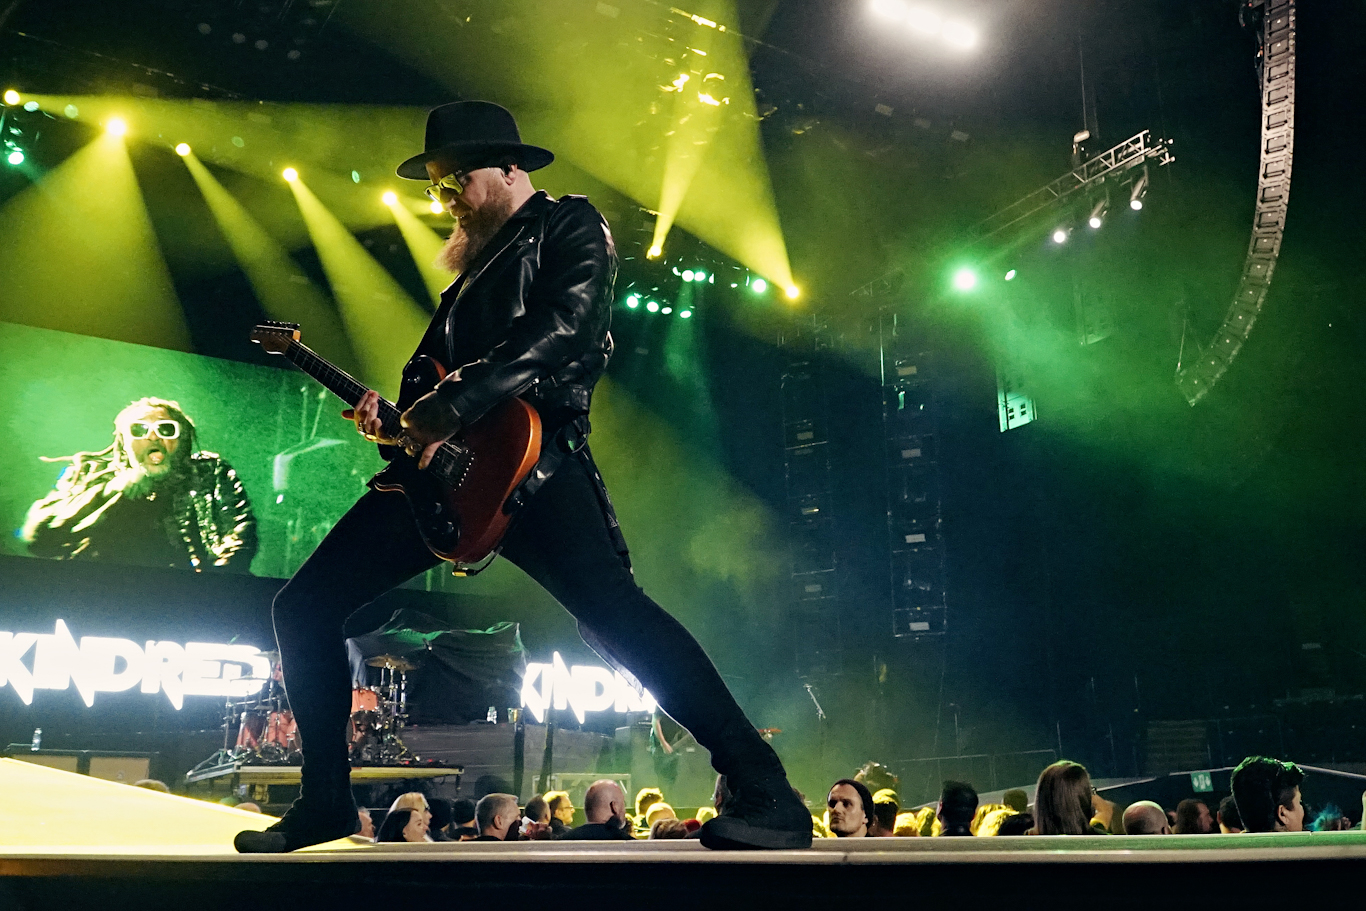 IN FOCUS// Volbeat with special guests Skindred & Napalm Death at Motorpoint Arena, Nottingham